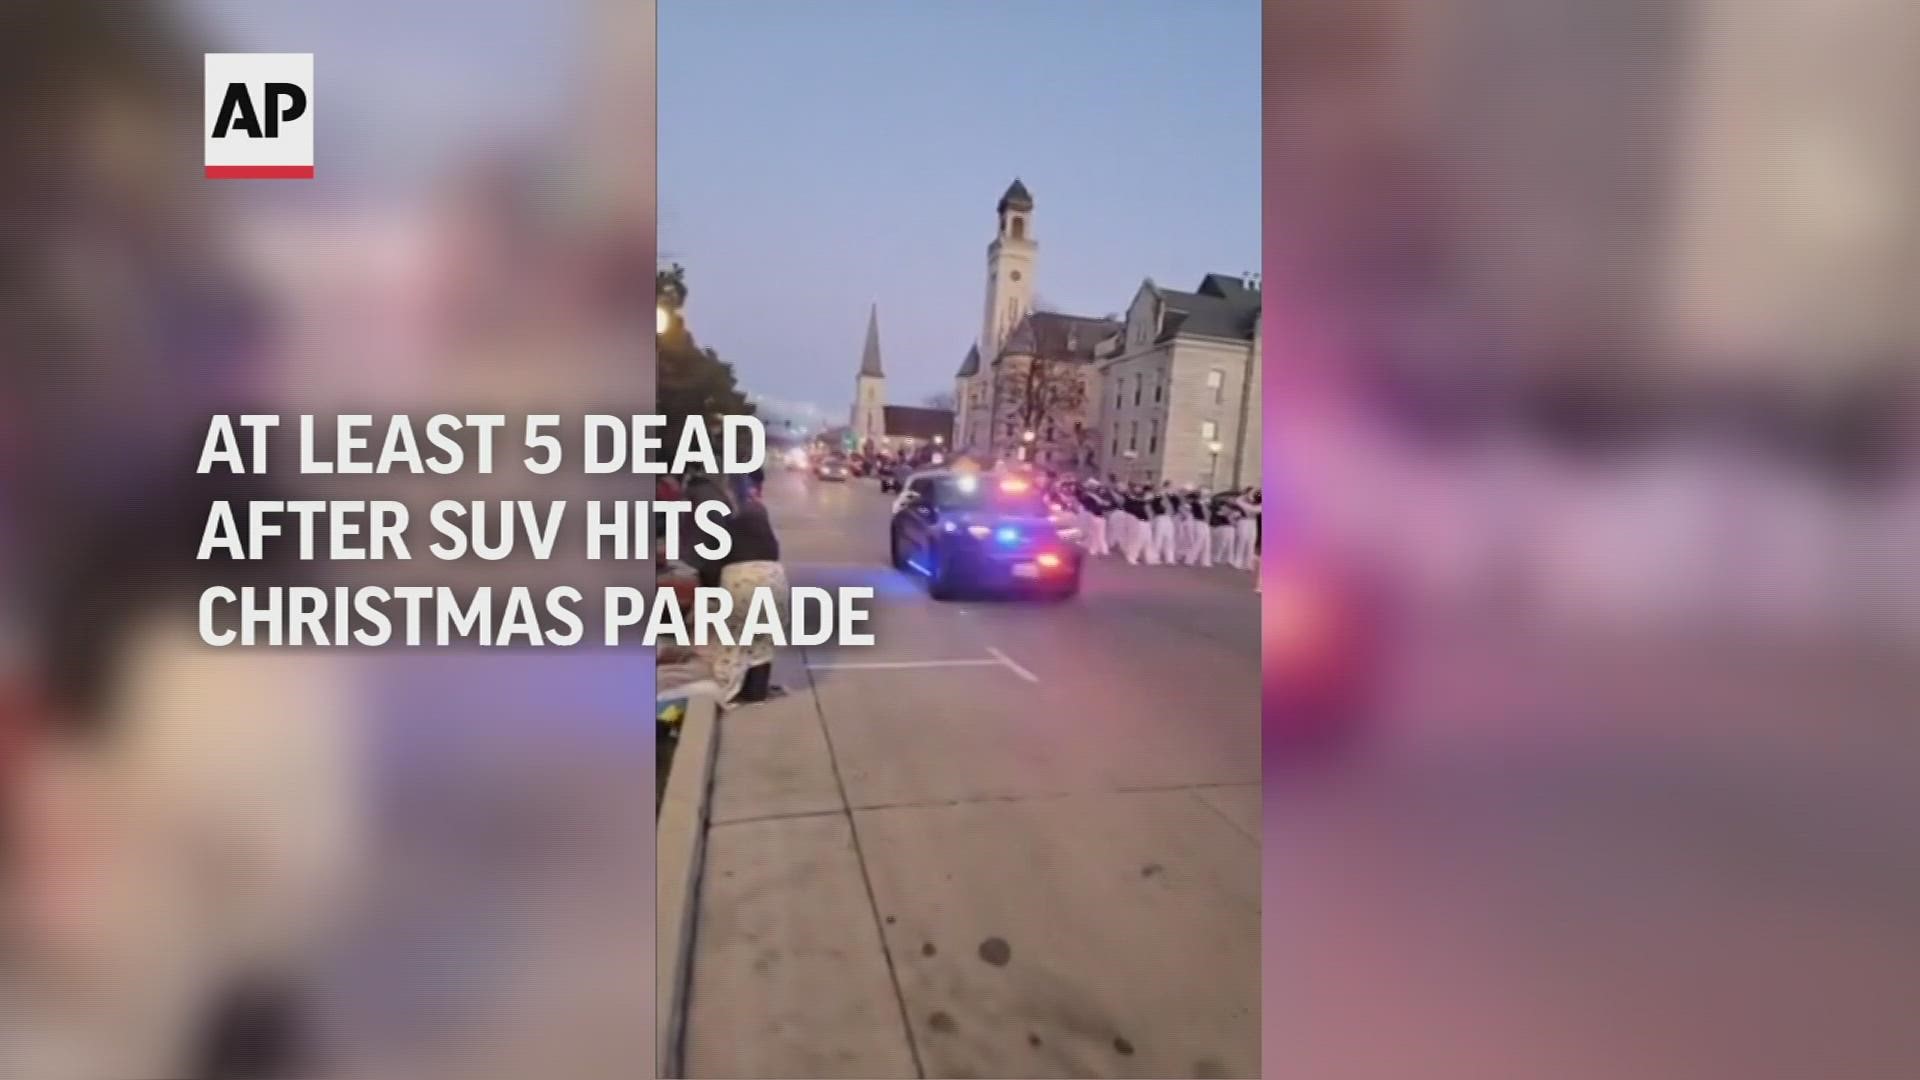 A joyous scene turned deadly in an instant Sunday, as an SUV sped through barricades and into a Christmas parade in suburban Milwaukee.